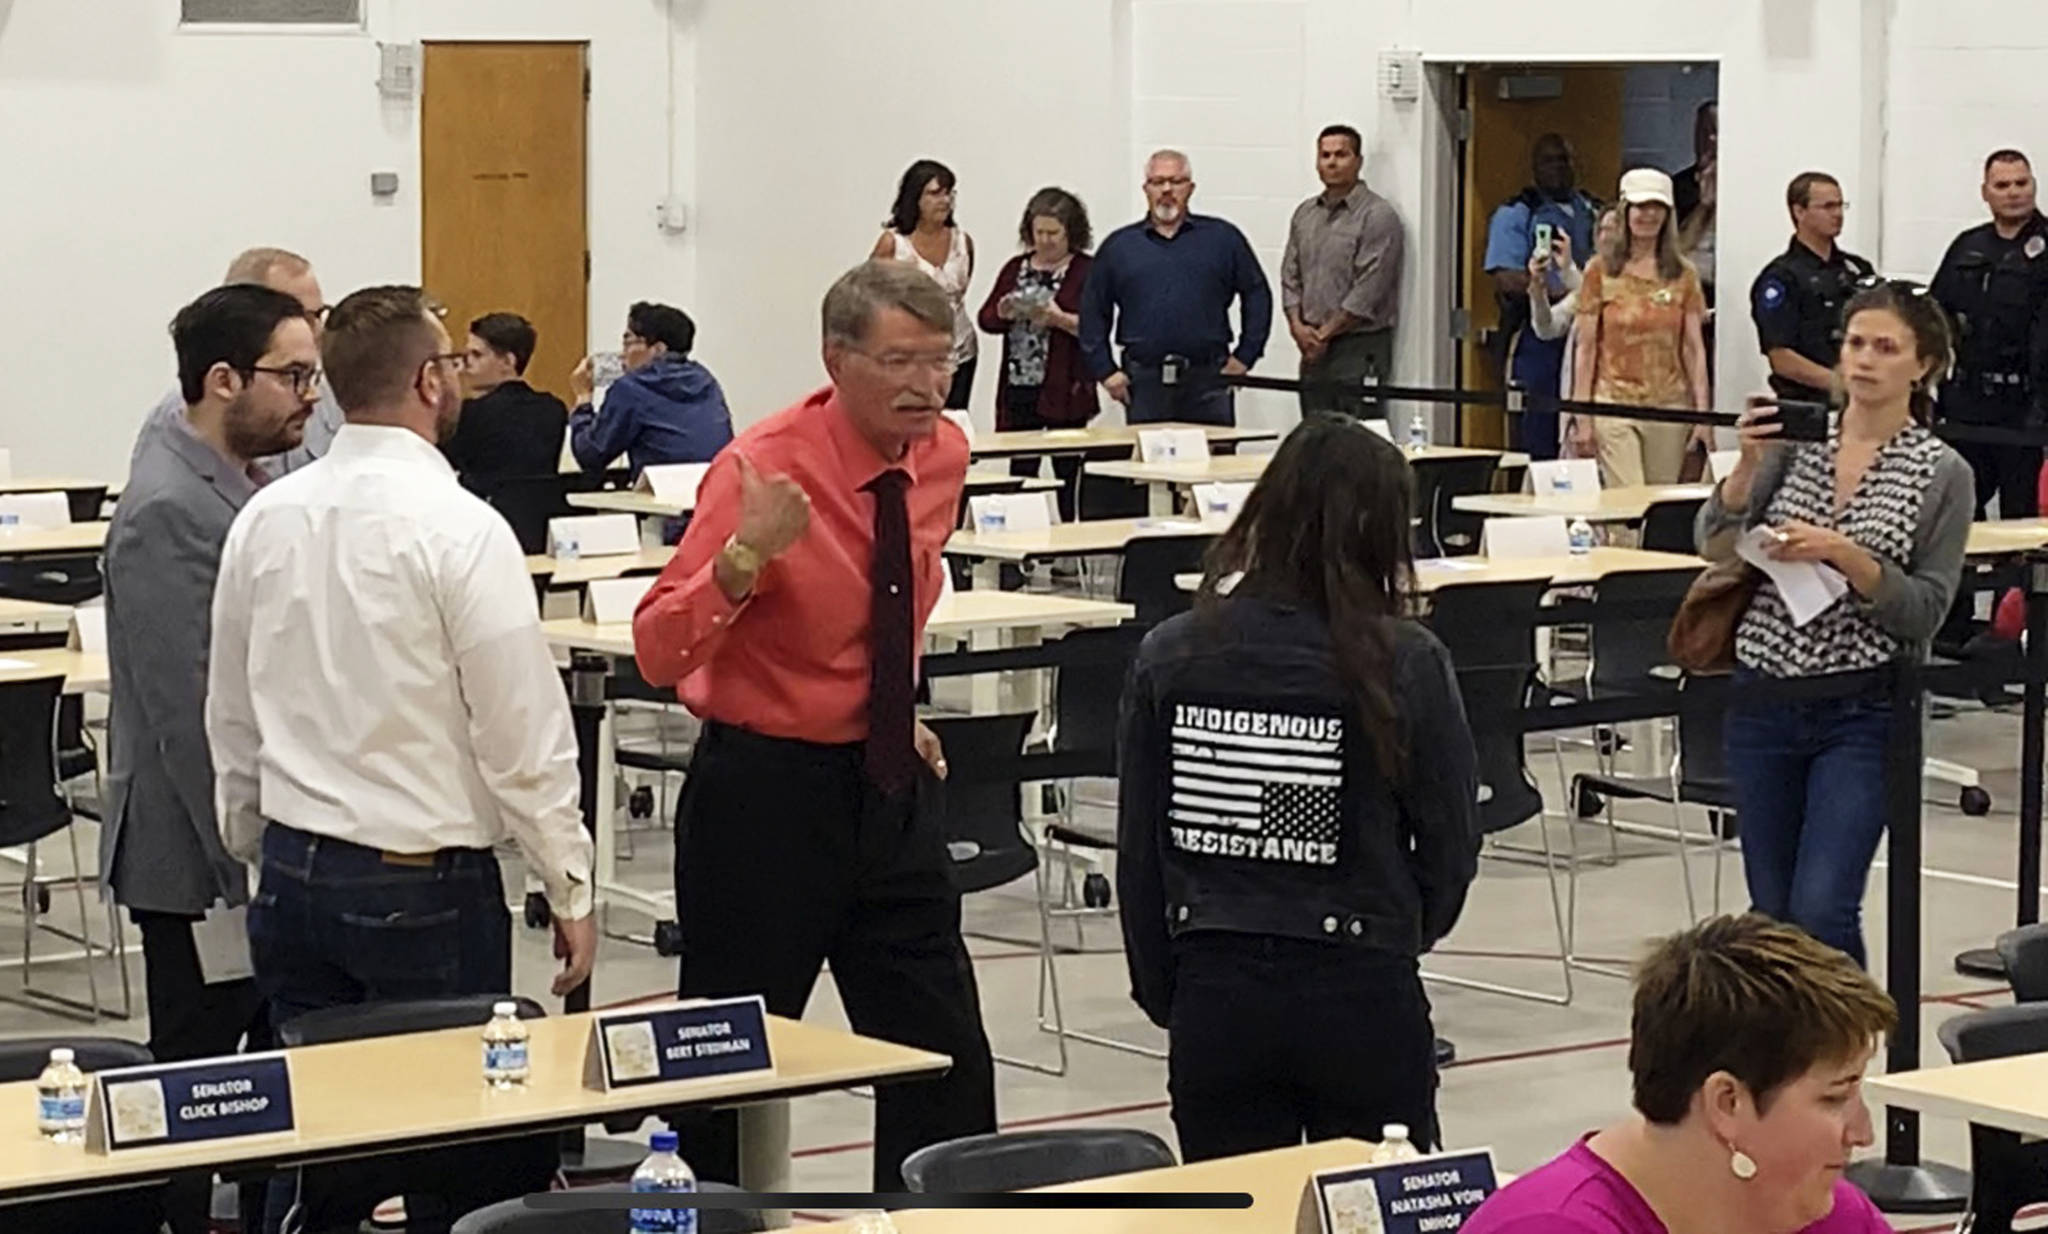 In this July 10, 2019, photo provided by Rochelle Adams, the mayor of Wasilla, Alaska, Bert Cottle, center left in the orange shirt, is seen after grabbing the arm of Alaska Native activist Haliehana Stepetin, who was trying to take part in a sit-in of legislators meeting in Wasilla. Stepetin filed an assault complaint with the Wasilla Police Department on Thursday, naming Cottle and Zachary Freeman, the spokesman for the Republican House Minority, seen next to Cottle in the white dress shirt. (Rochelle Adams via AP)